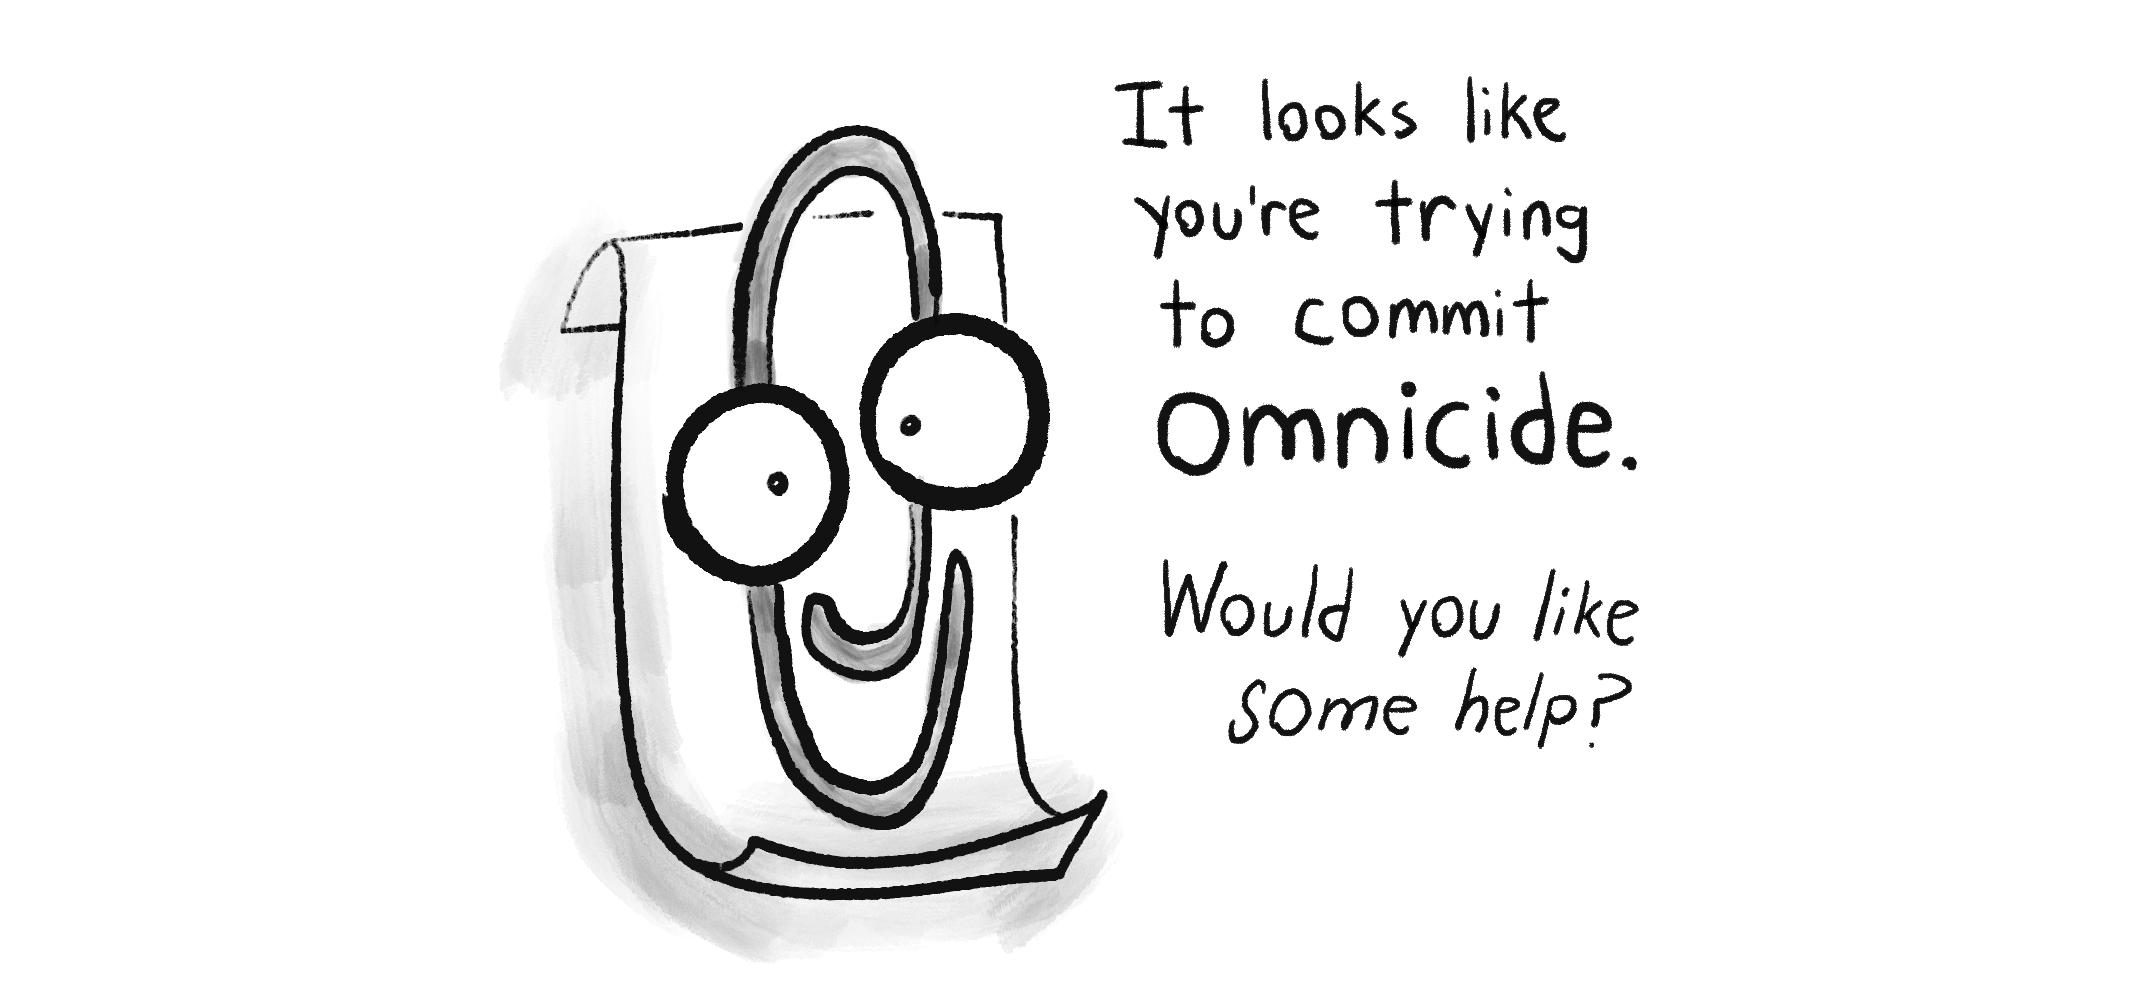 A drawing of Microsoft Clippy saying: "It looks like you're trying to commit omnicide. Would you like some help?"